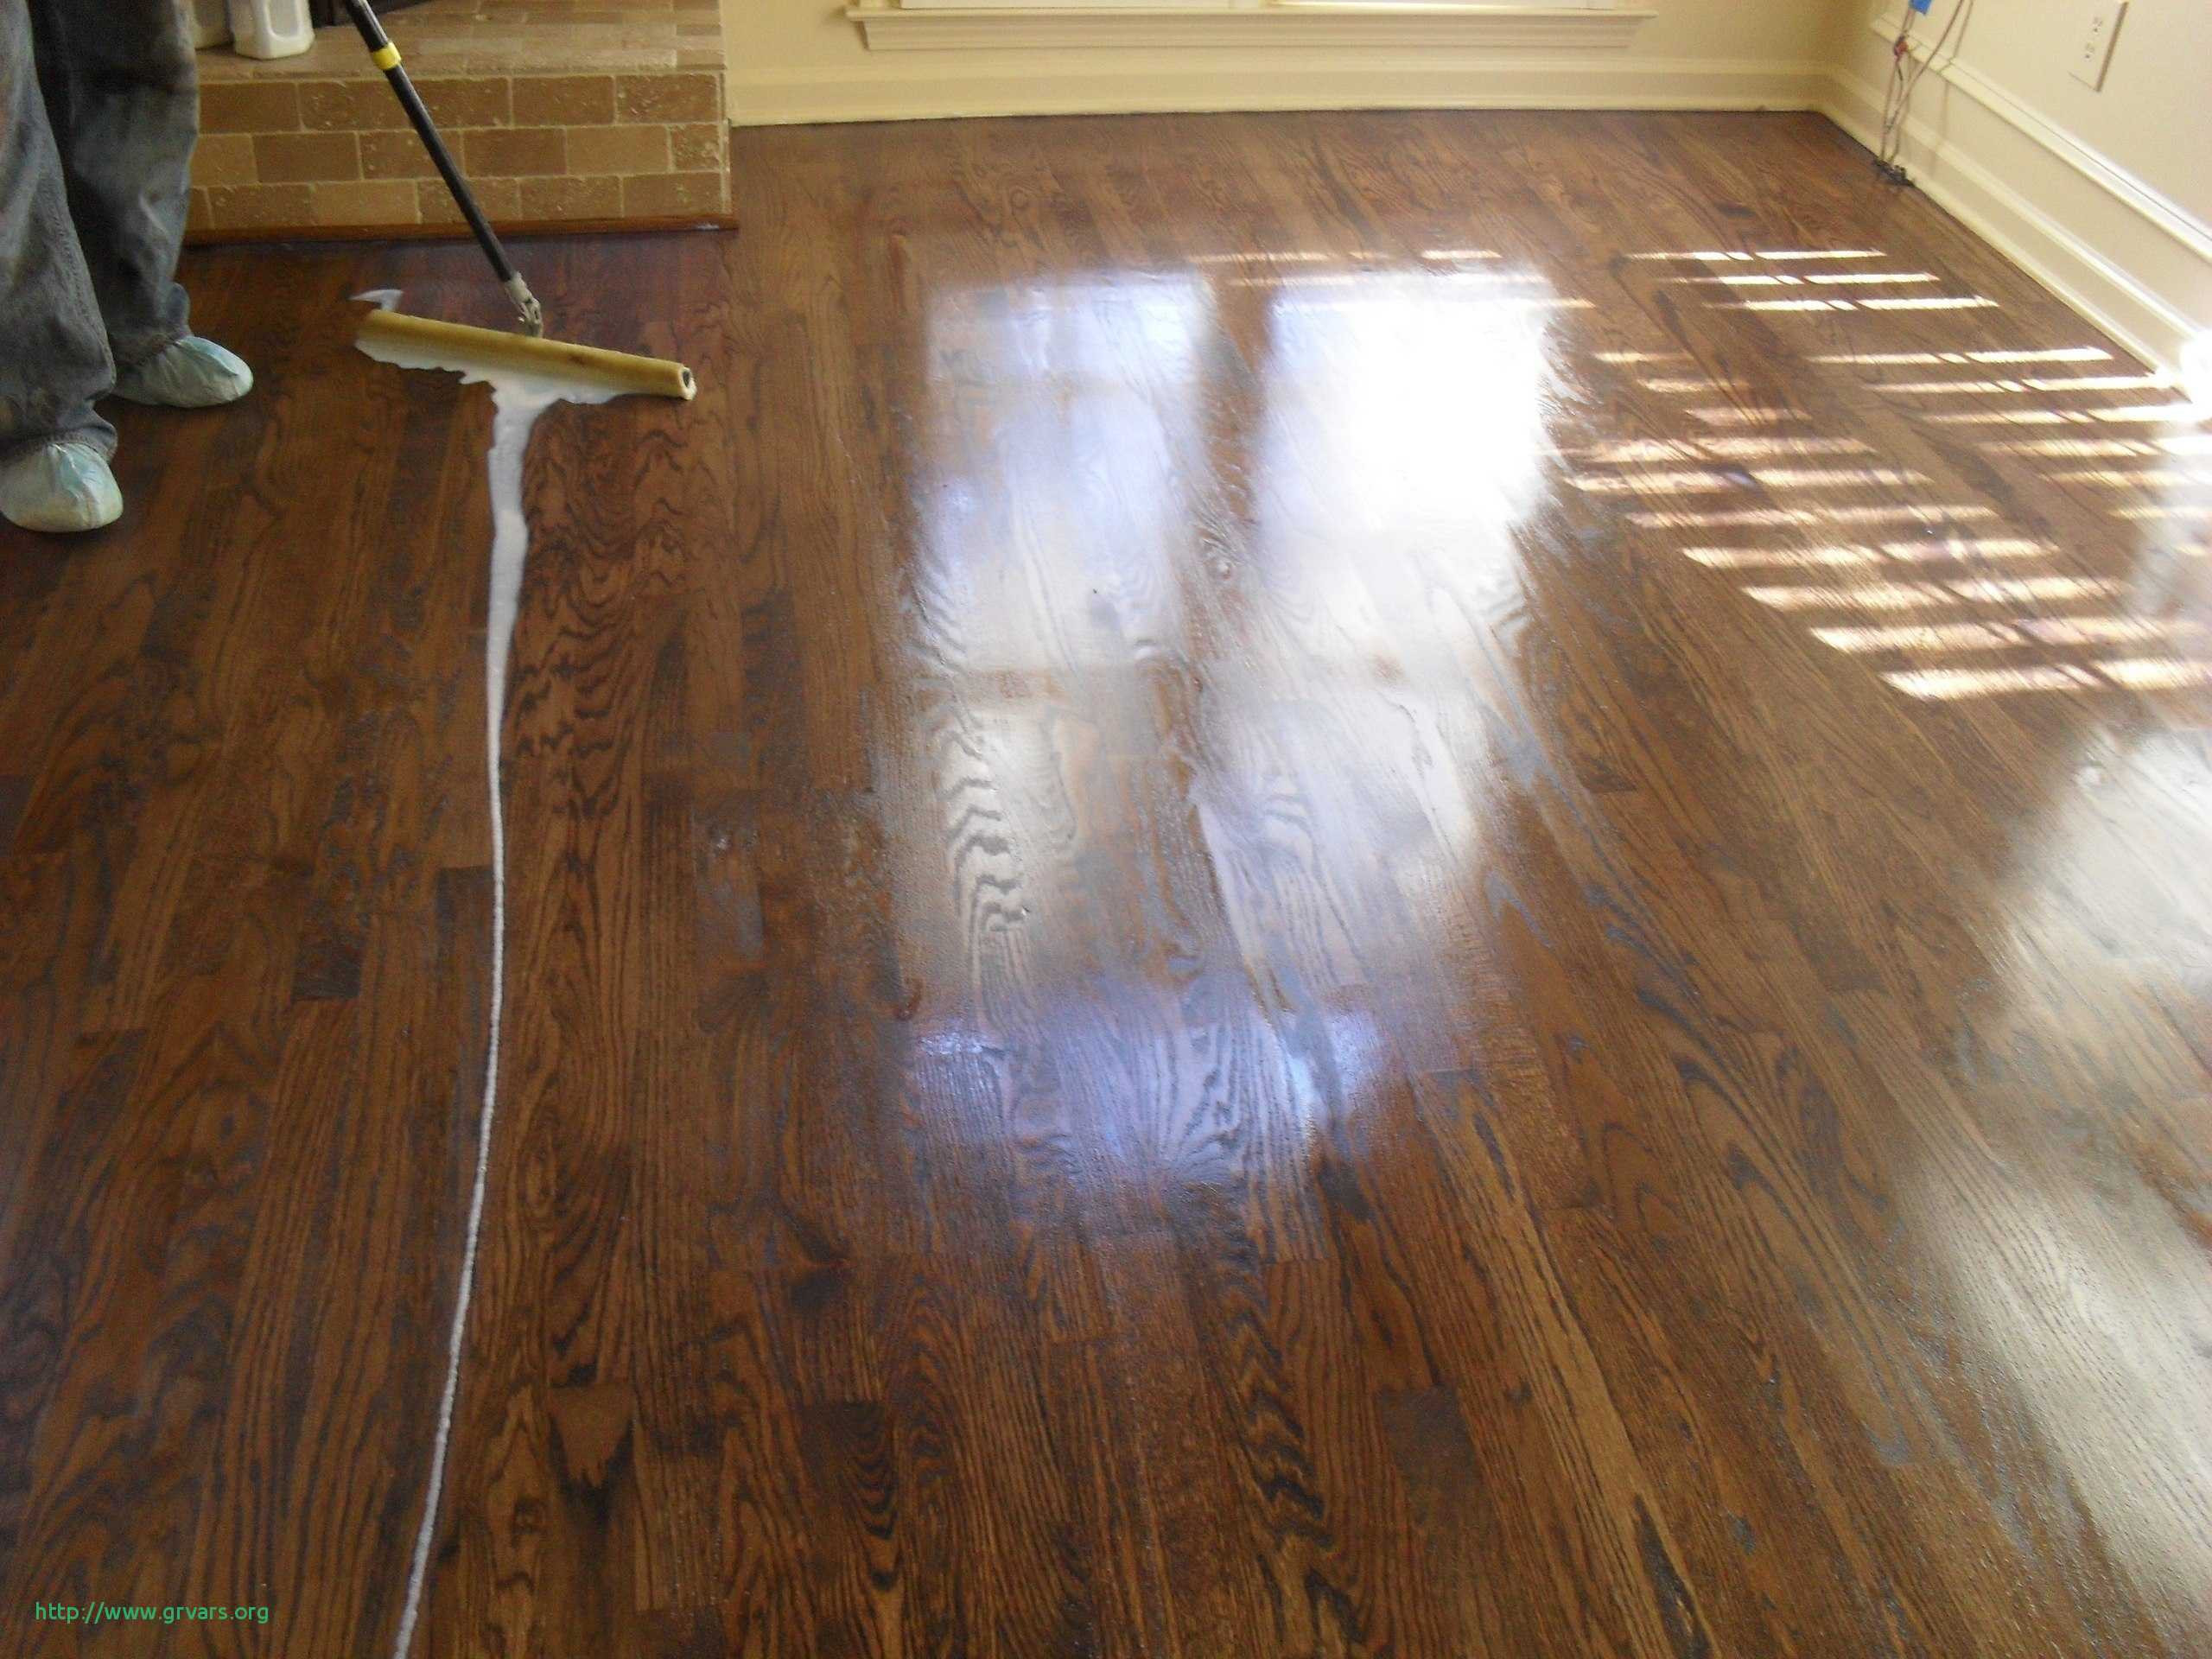 24 Recommended How Long Does It Take to Refinish Hardwood Floors 2023 free download how long does it take to refinish hardwood floors of image number 6563 from post restoring old hardwood floors will intended for nouveau hardwood floors yourself ideas restoring old will ins